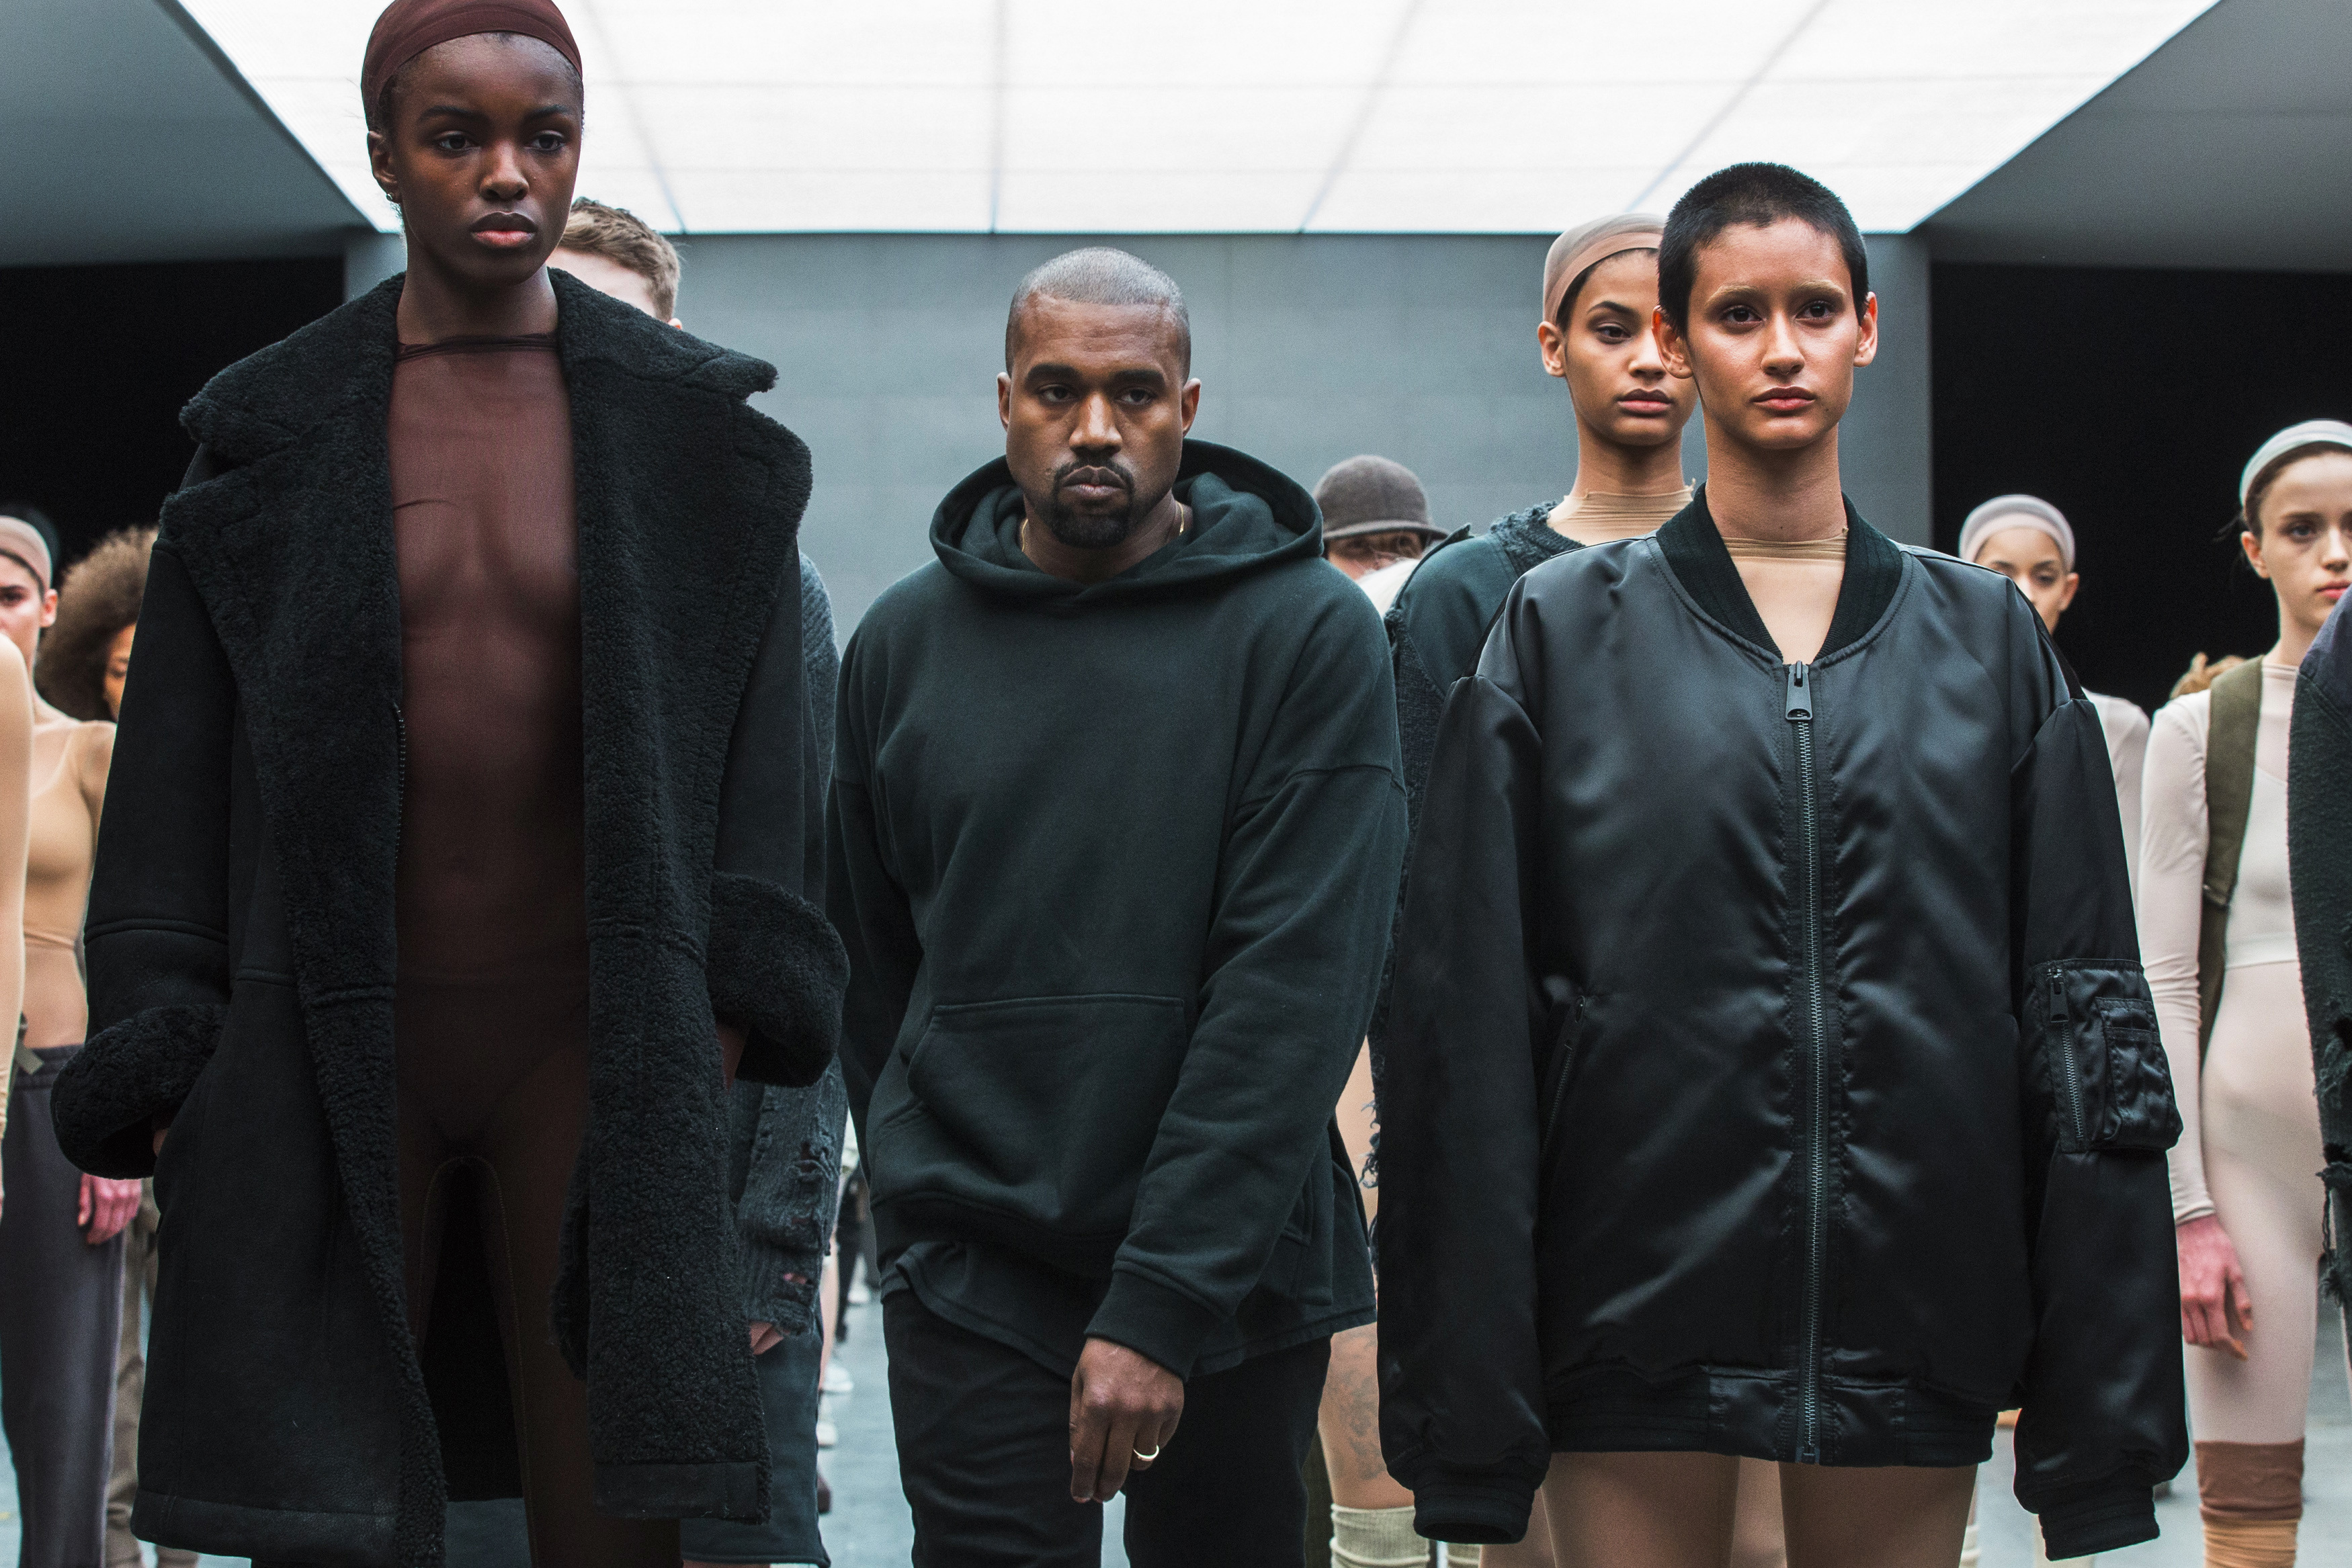 Singer Kanye West walks a model after presenting his Fall/Winter 2015 collaboration with Adidas at New York Fashion Week